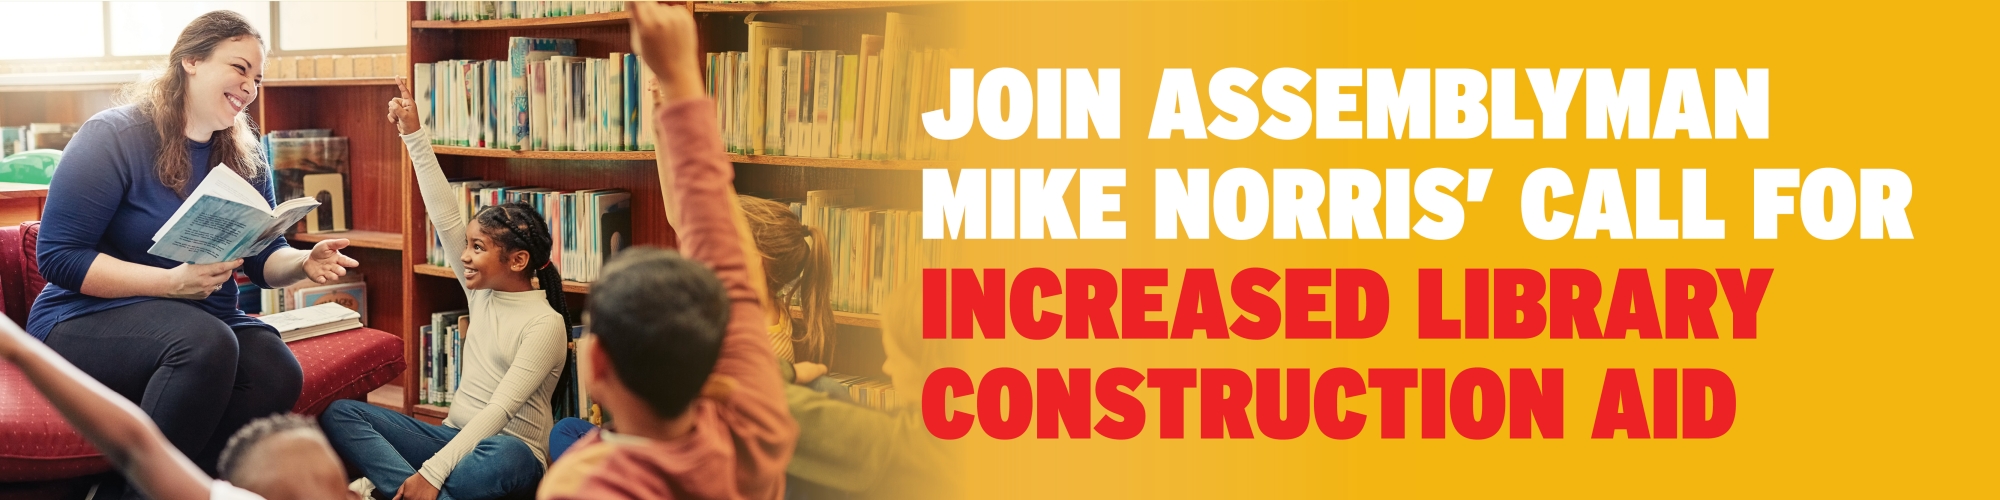 JOIN ASSEMBLYMAN MIKE NORRIS’ CALL FOR INCREASED LIBRARY CONSTRUCTION AID